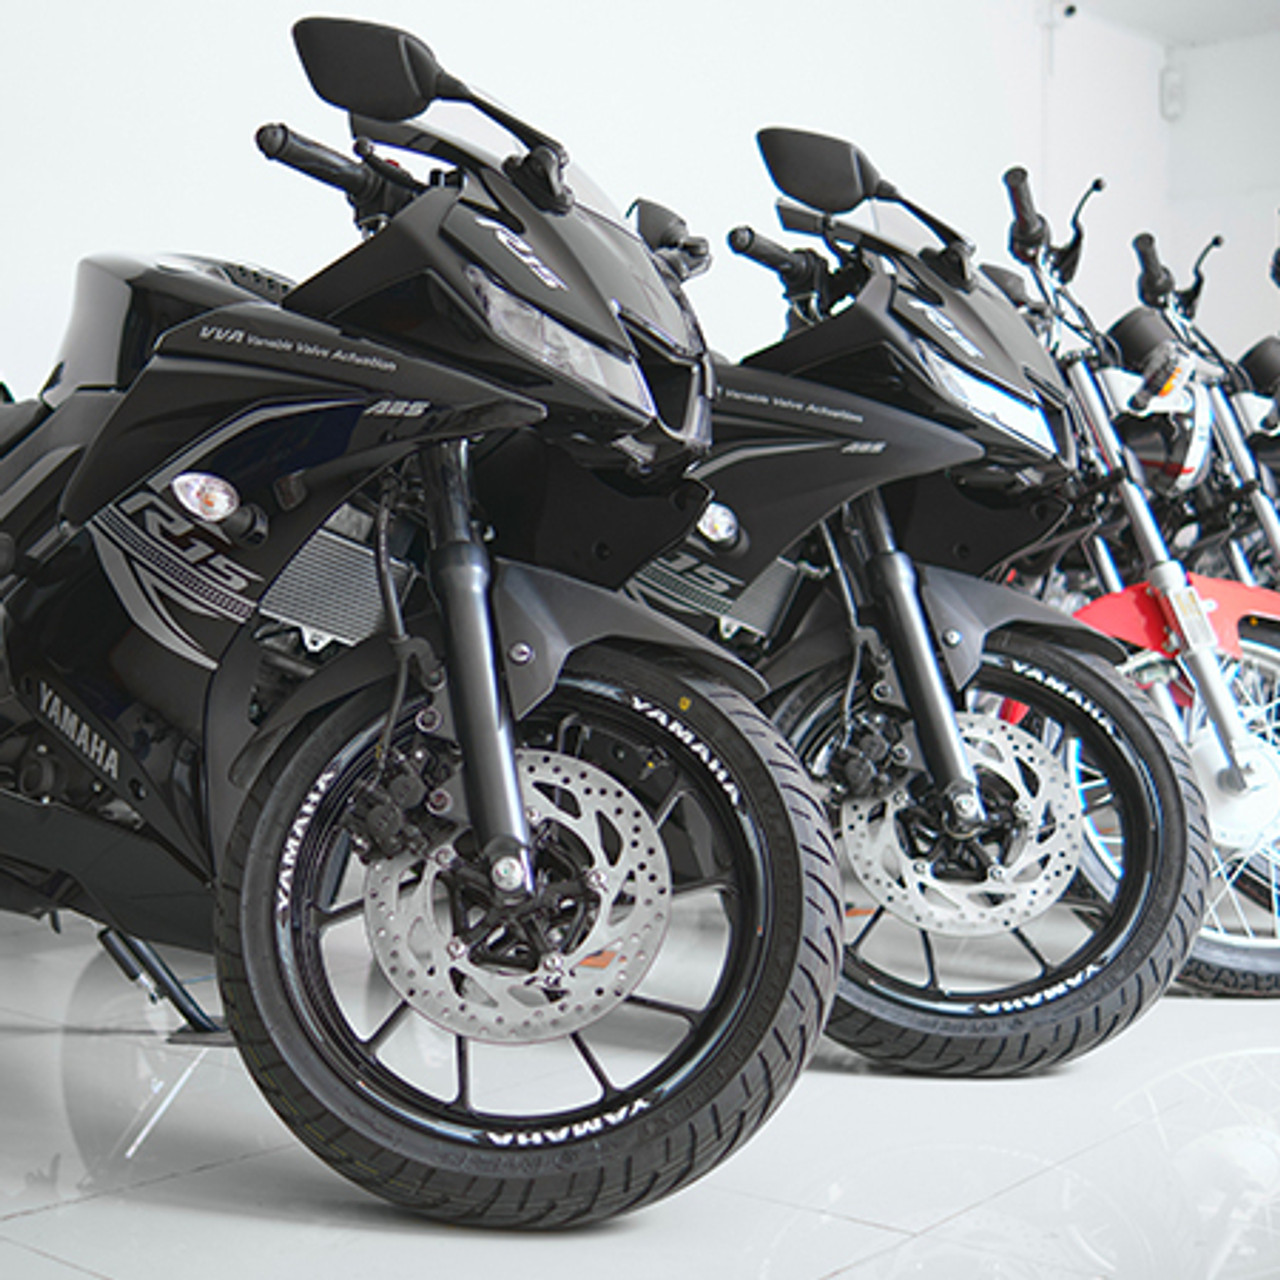 Motorcycle Products